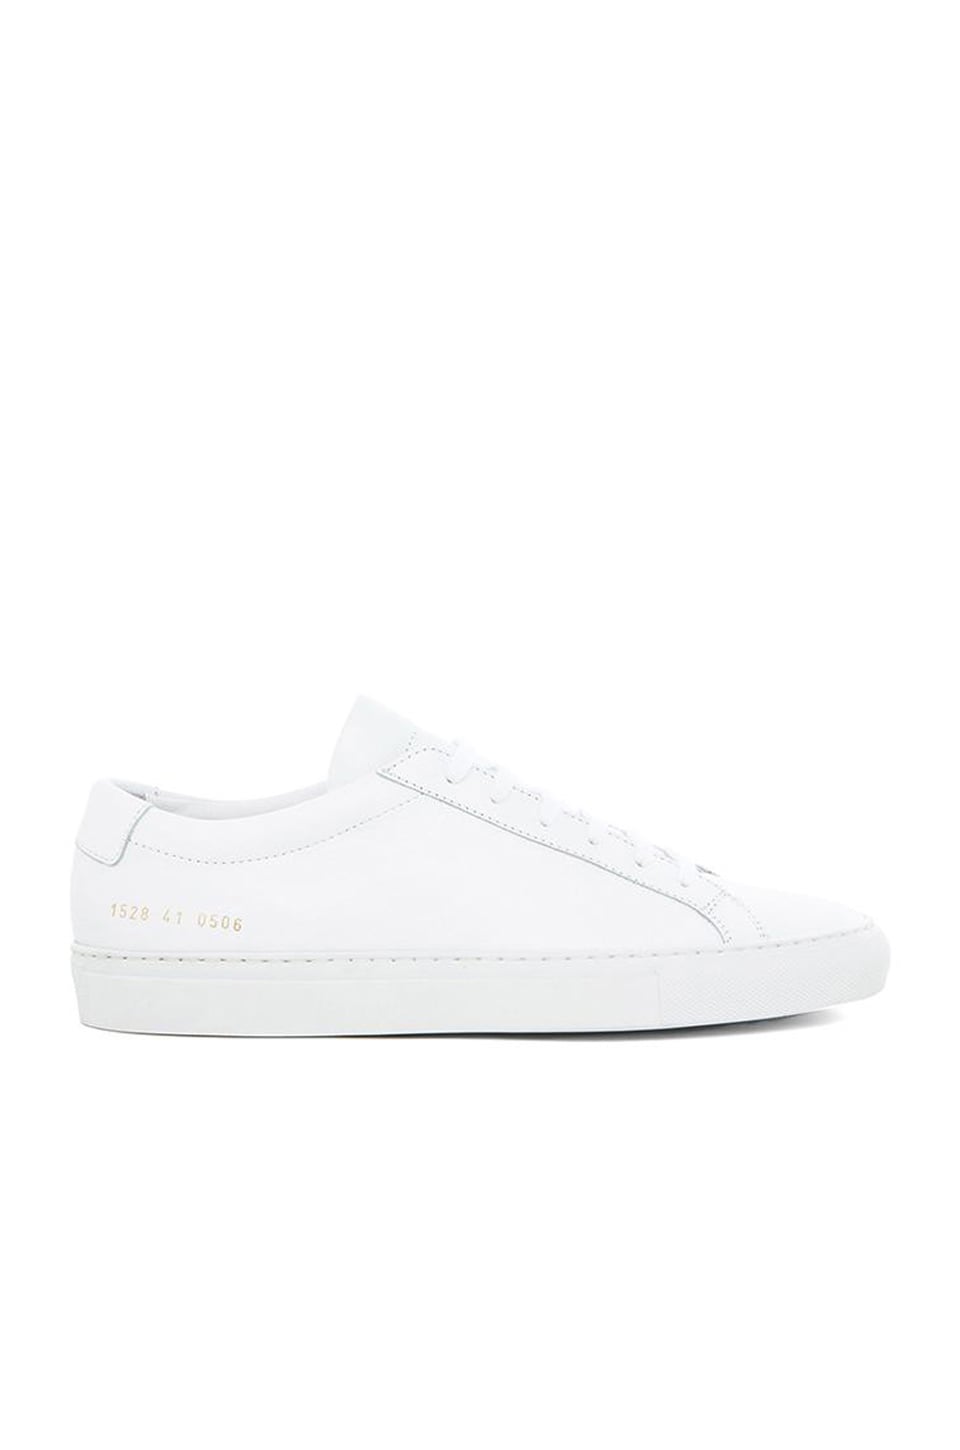 Common Projects Original Achilles Low in White | REVOLVE